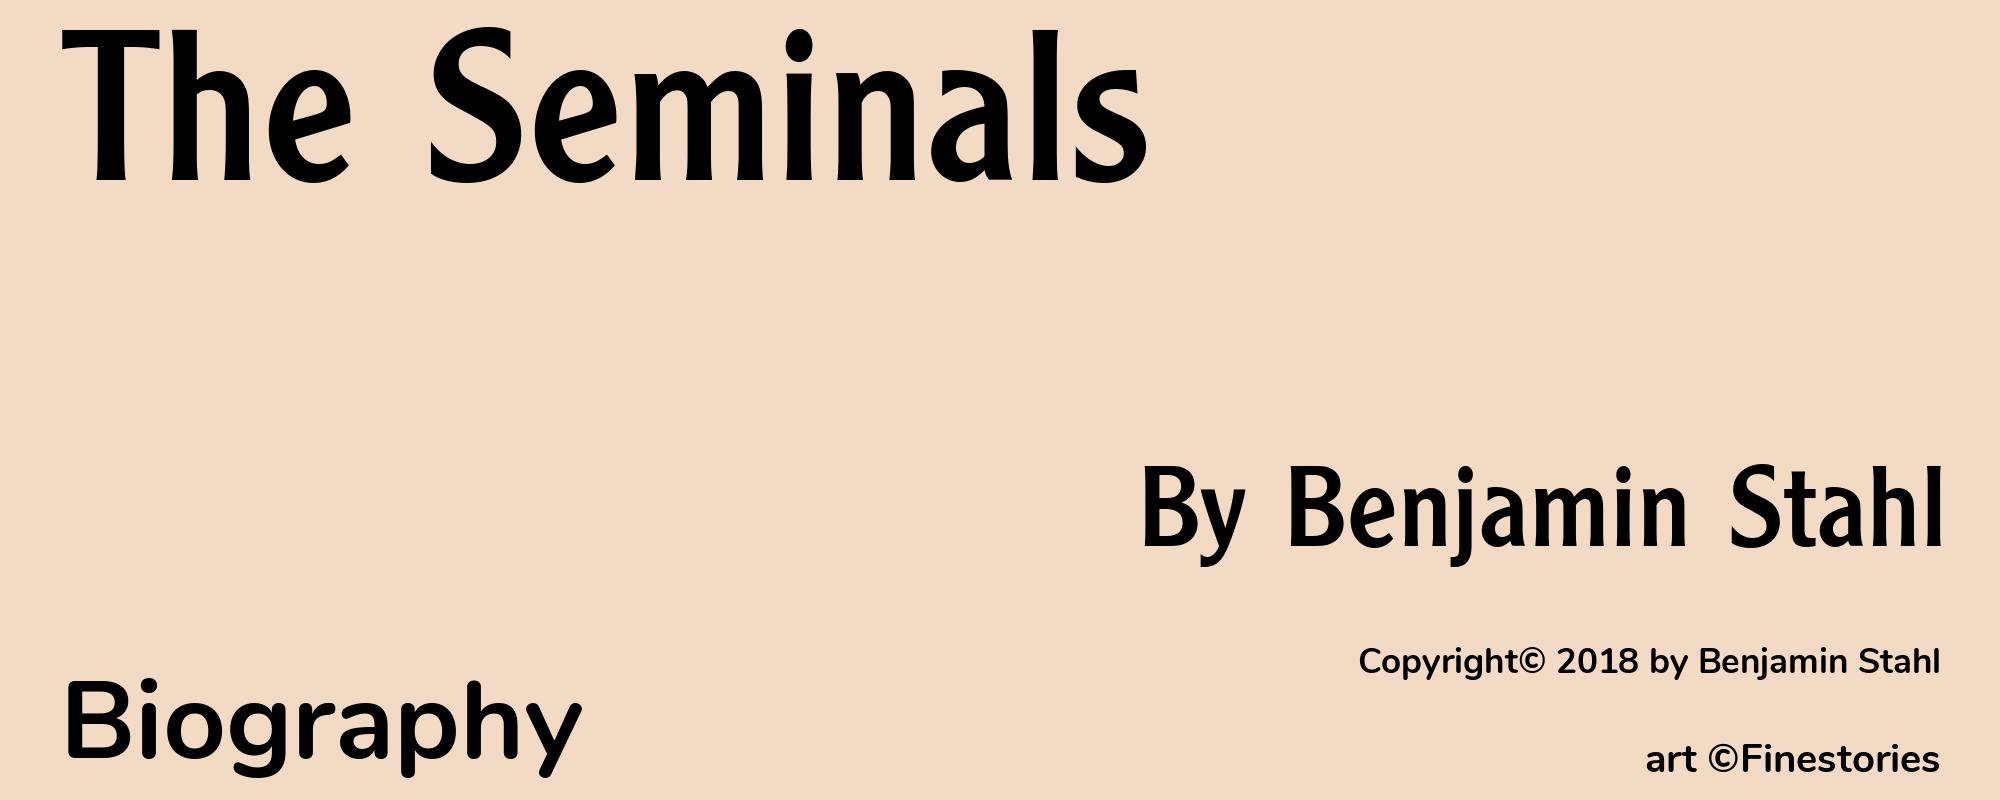 The Seminals - Cover